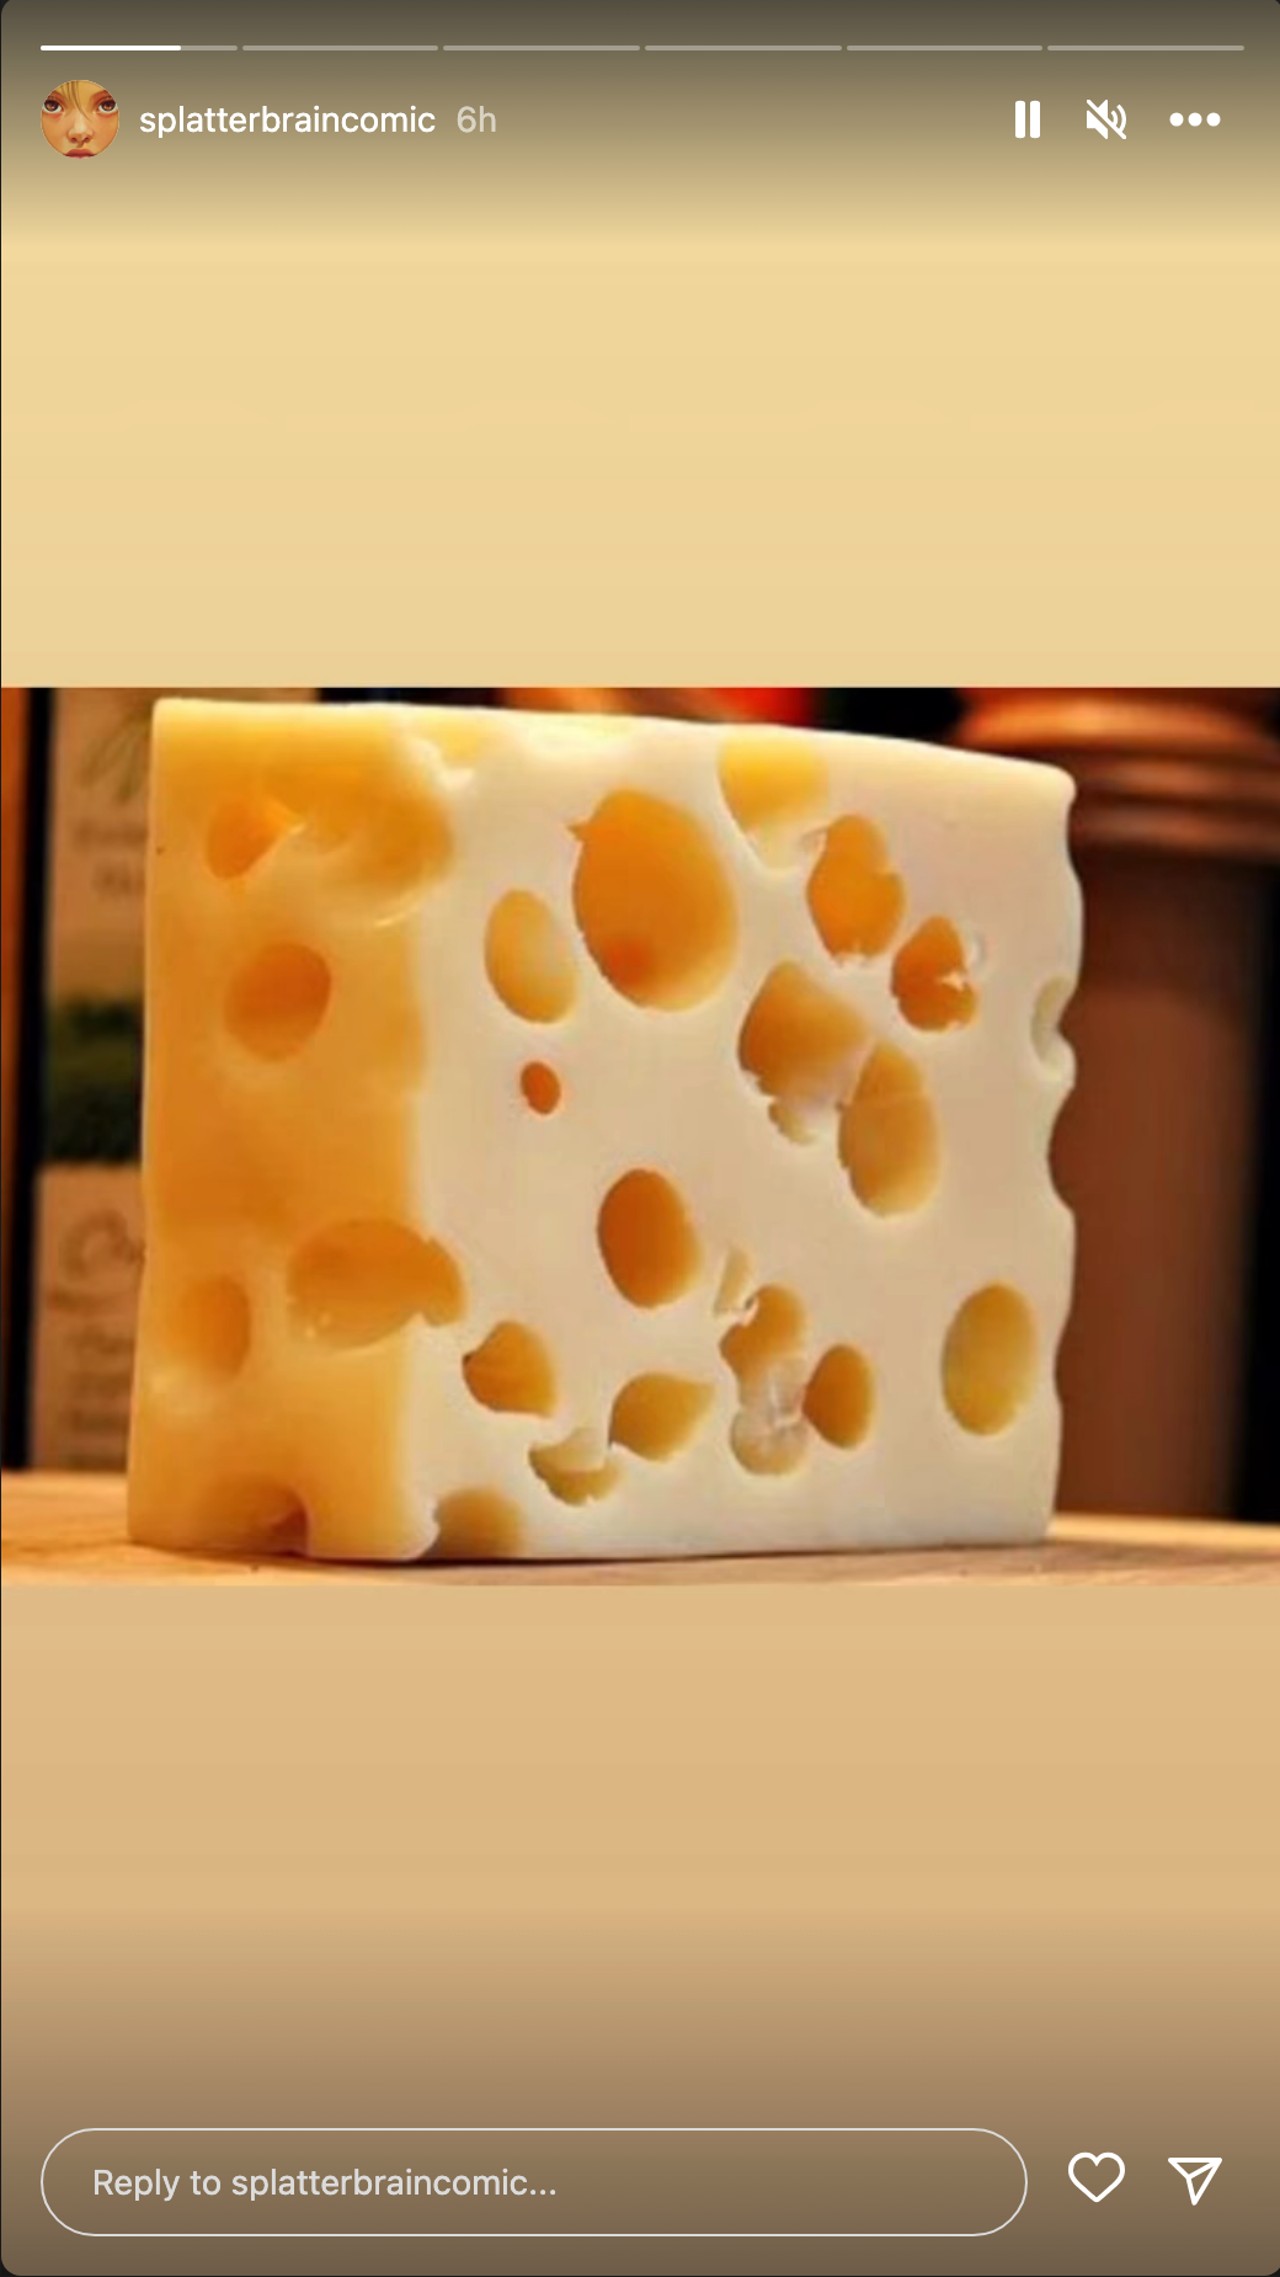 Picture of a wedge of cheese